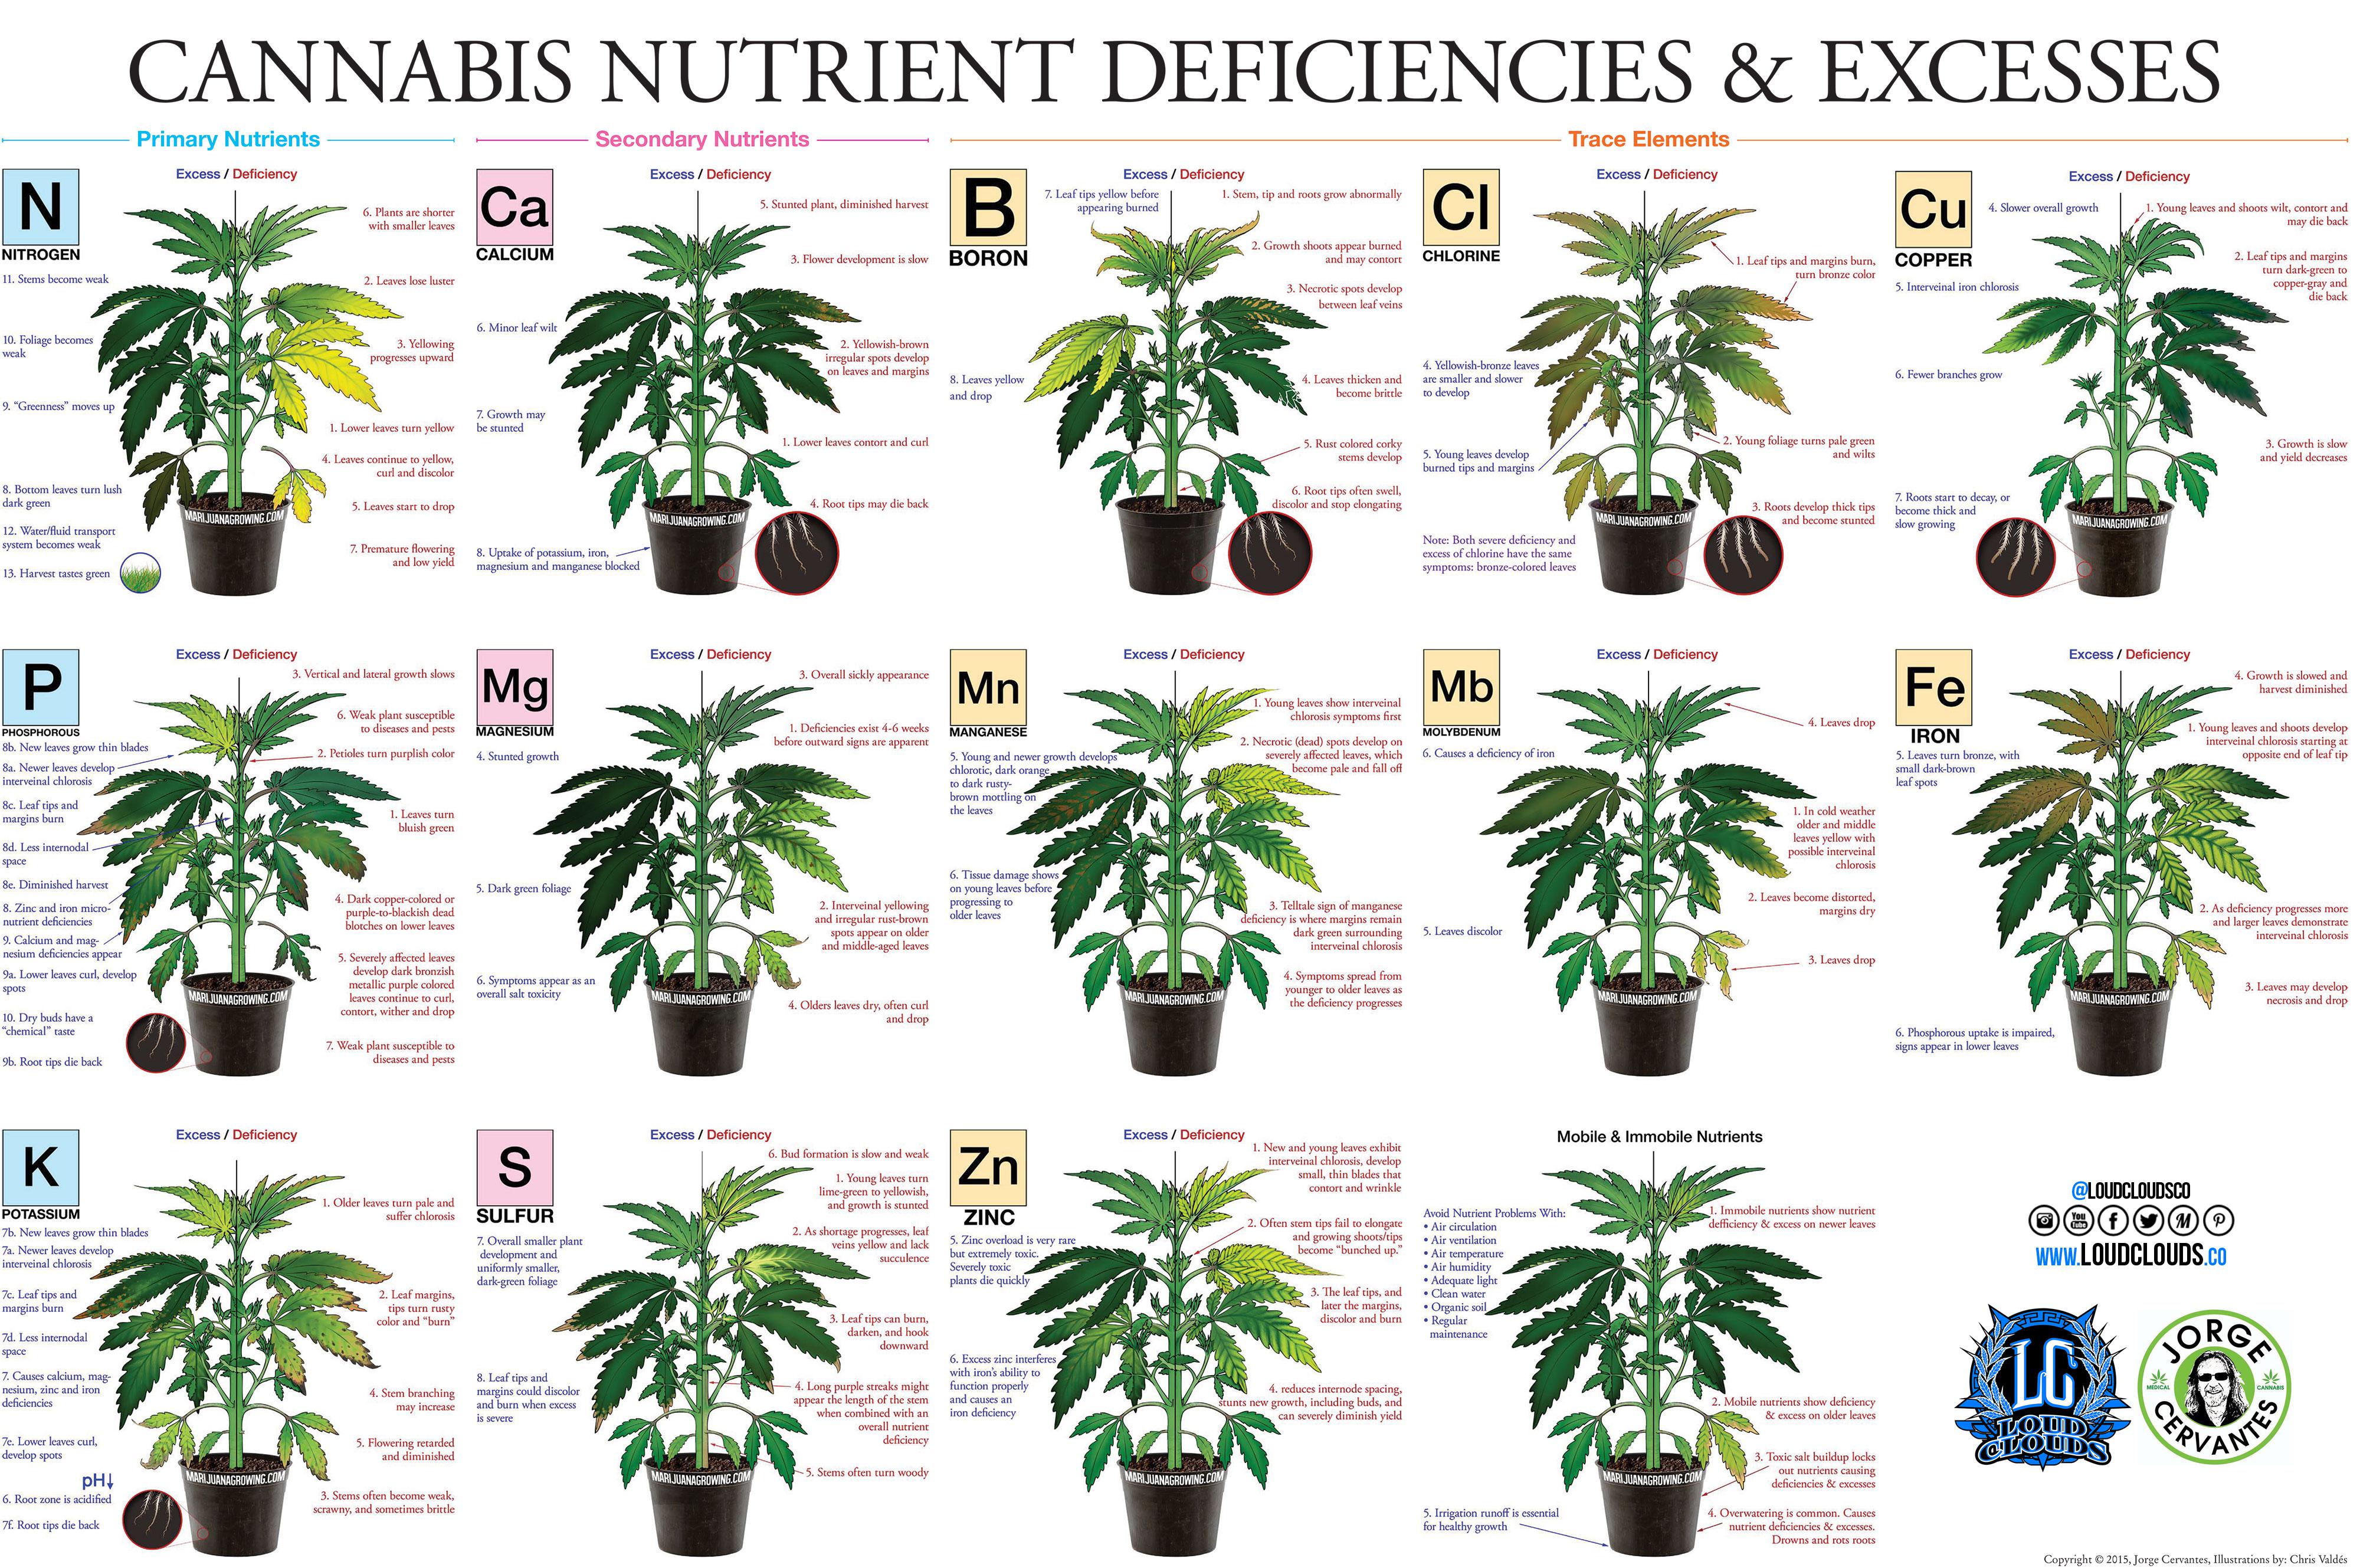 Whole plant nutrient deficiencies and excesses.jpeg